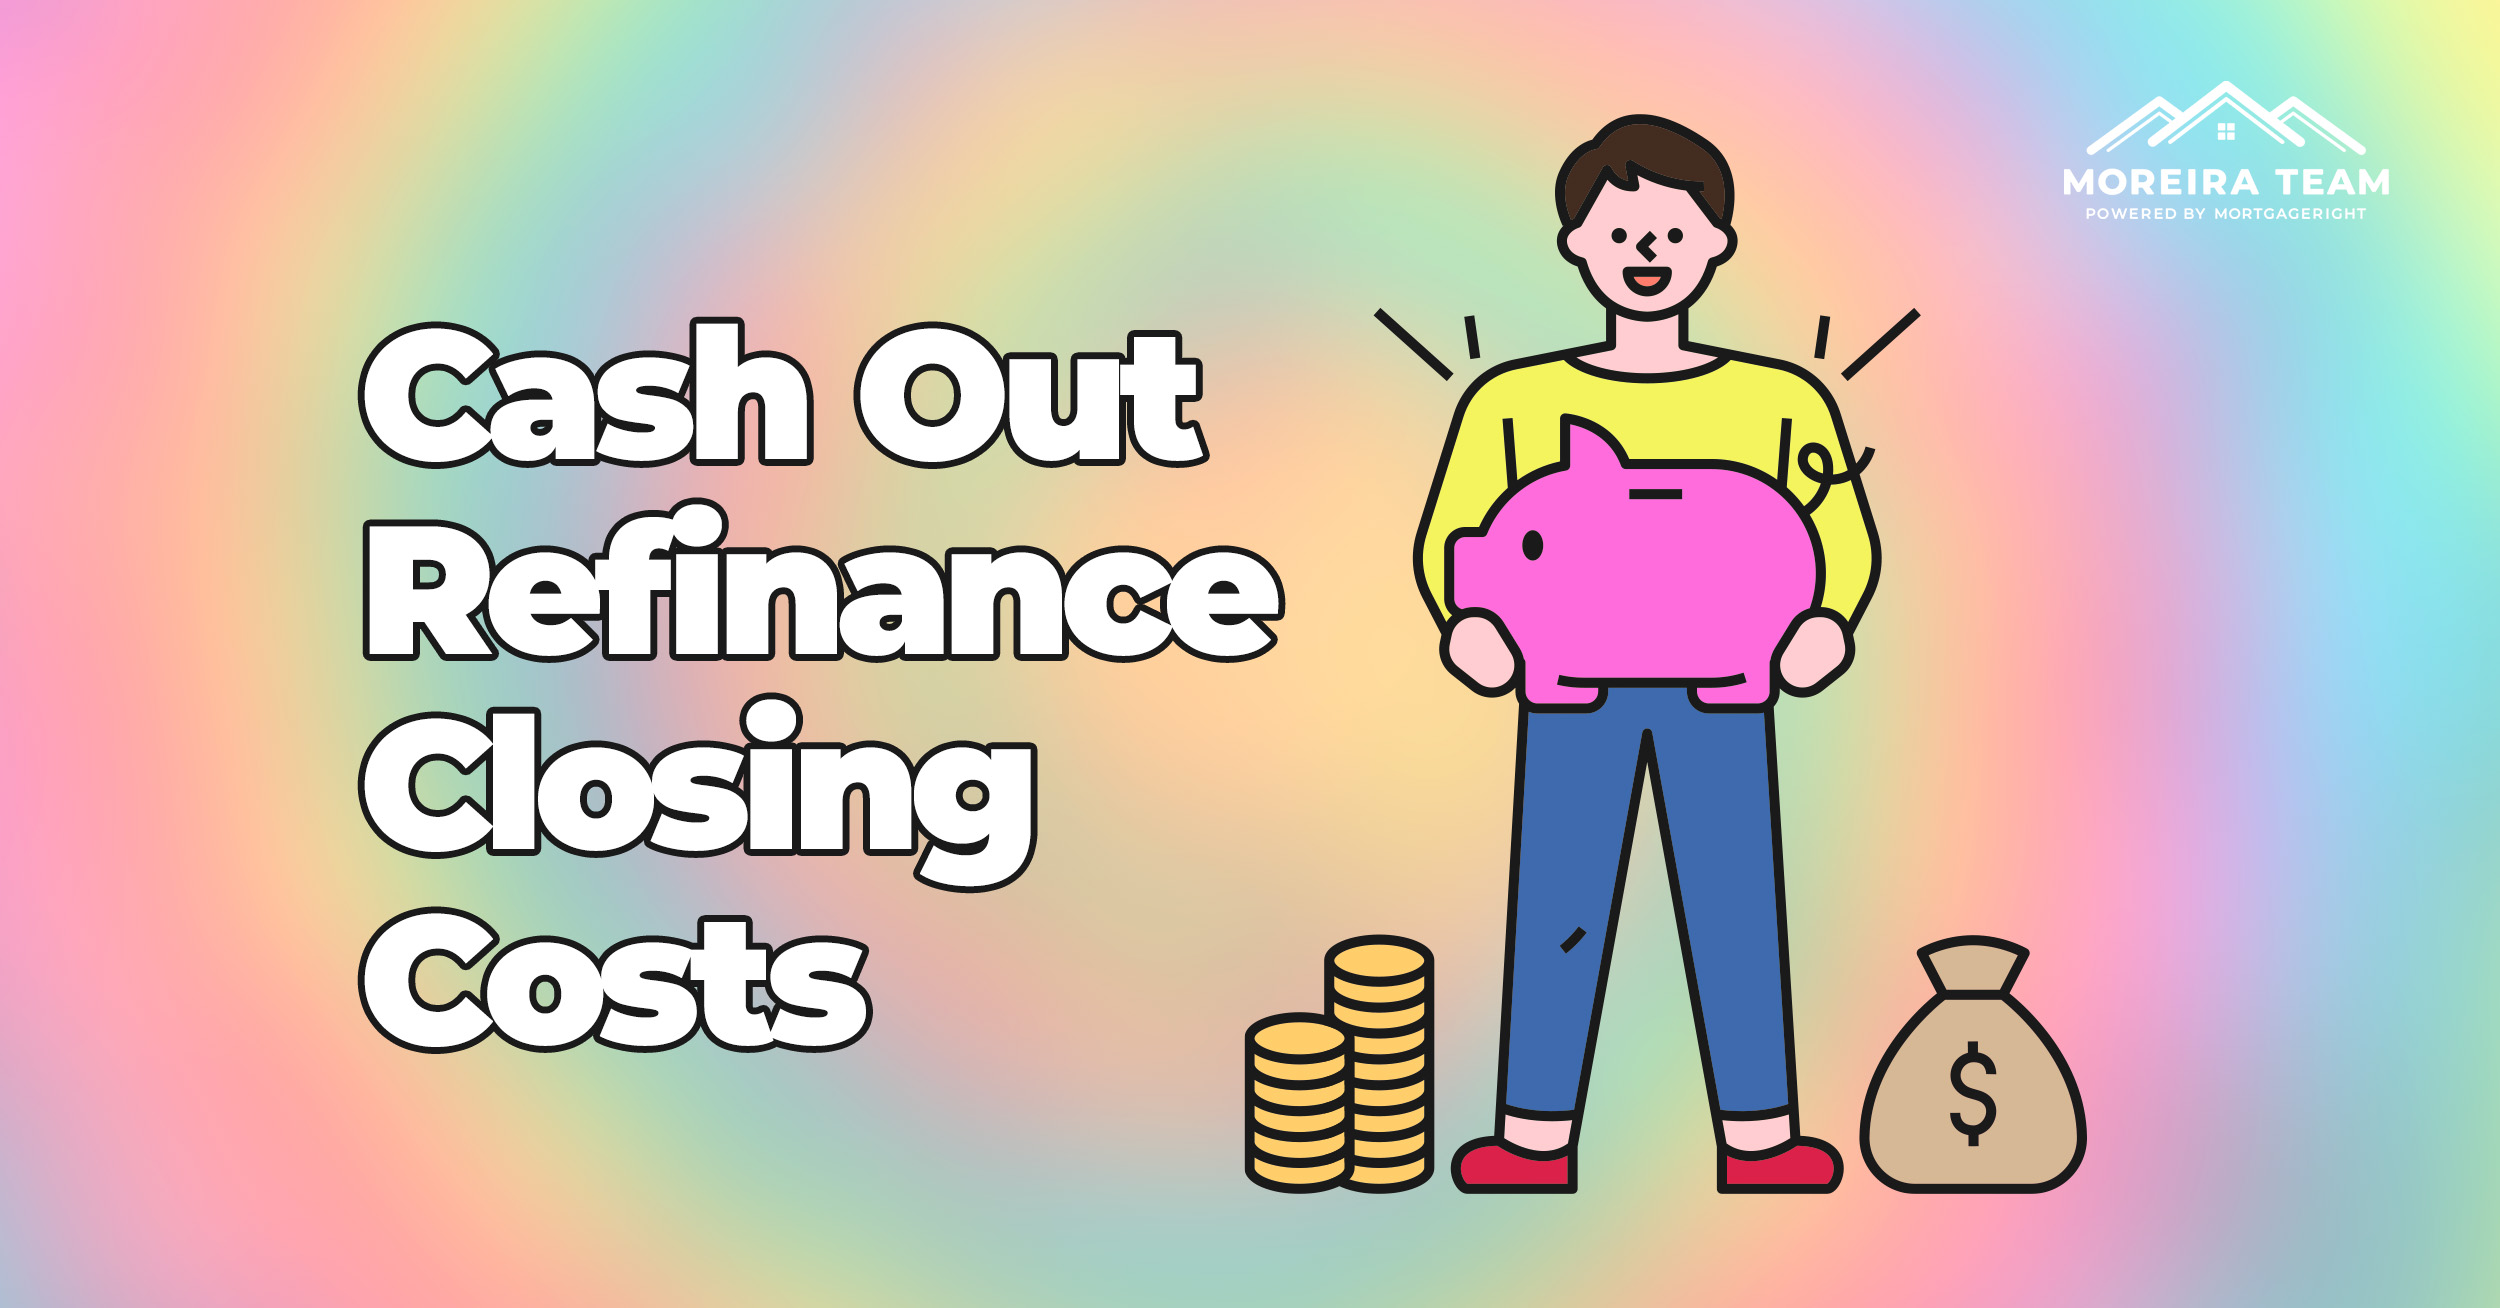 Cash Out Refinance Closing Costs